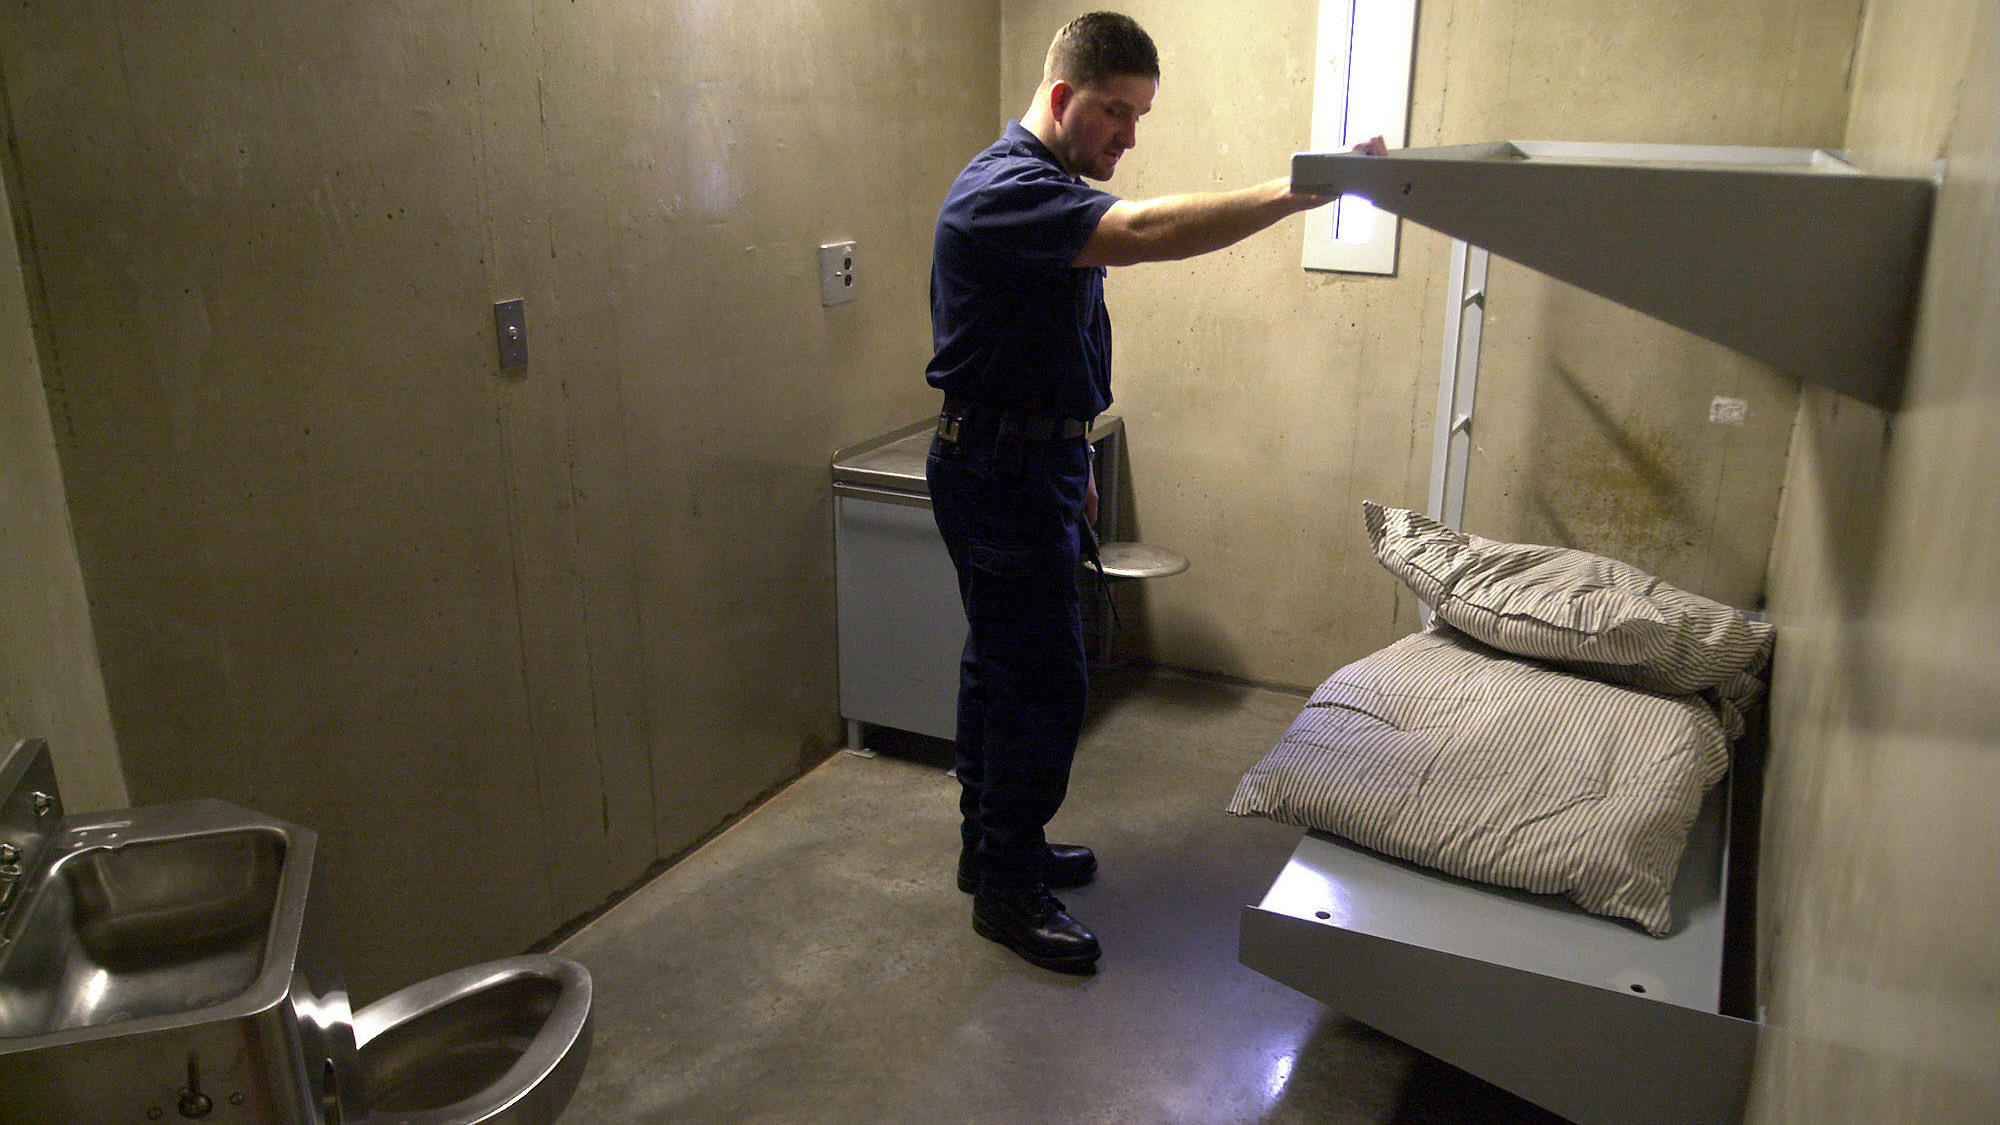 Advocates Push To Bring Solitary Confinement Out Of The Shadows West